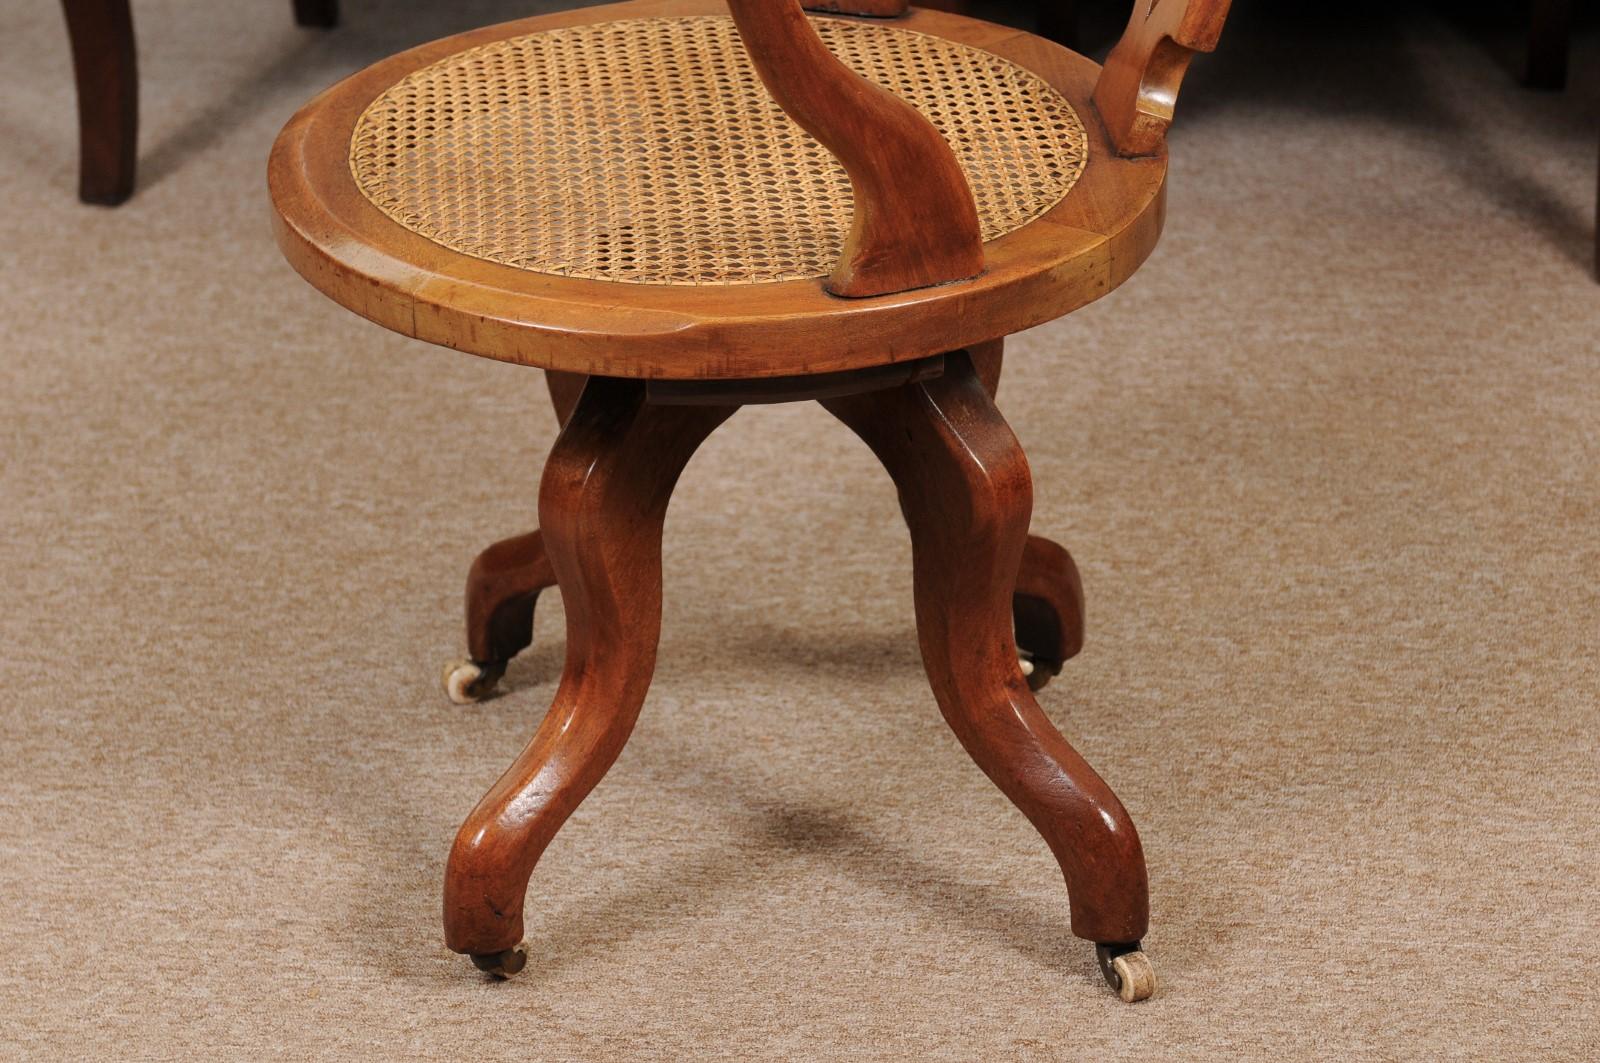 Victorian Walnut Desk Chair with Swivel Caned Seat, England, Late 19th Century For Sale 5